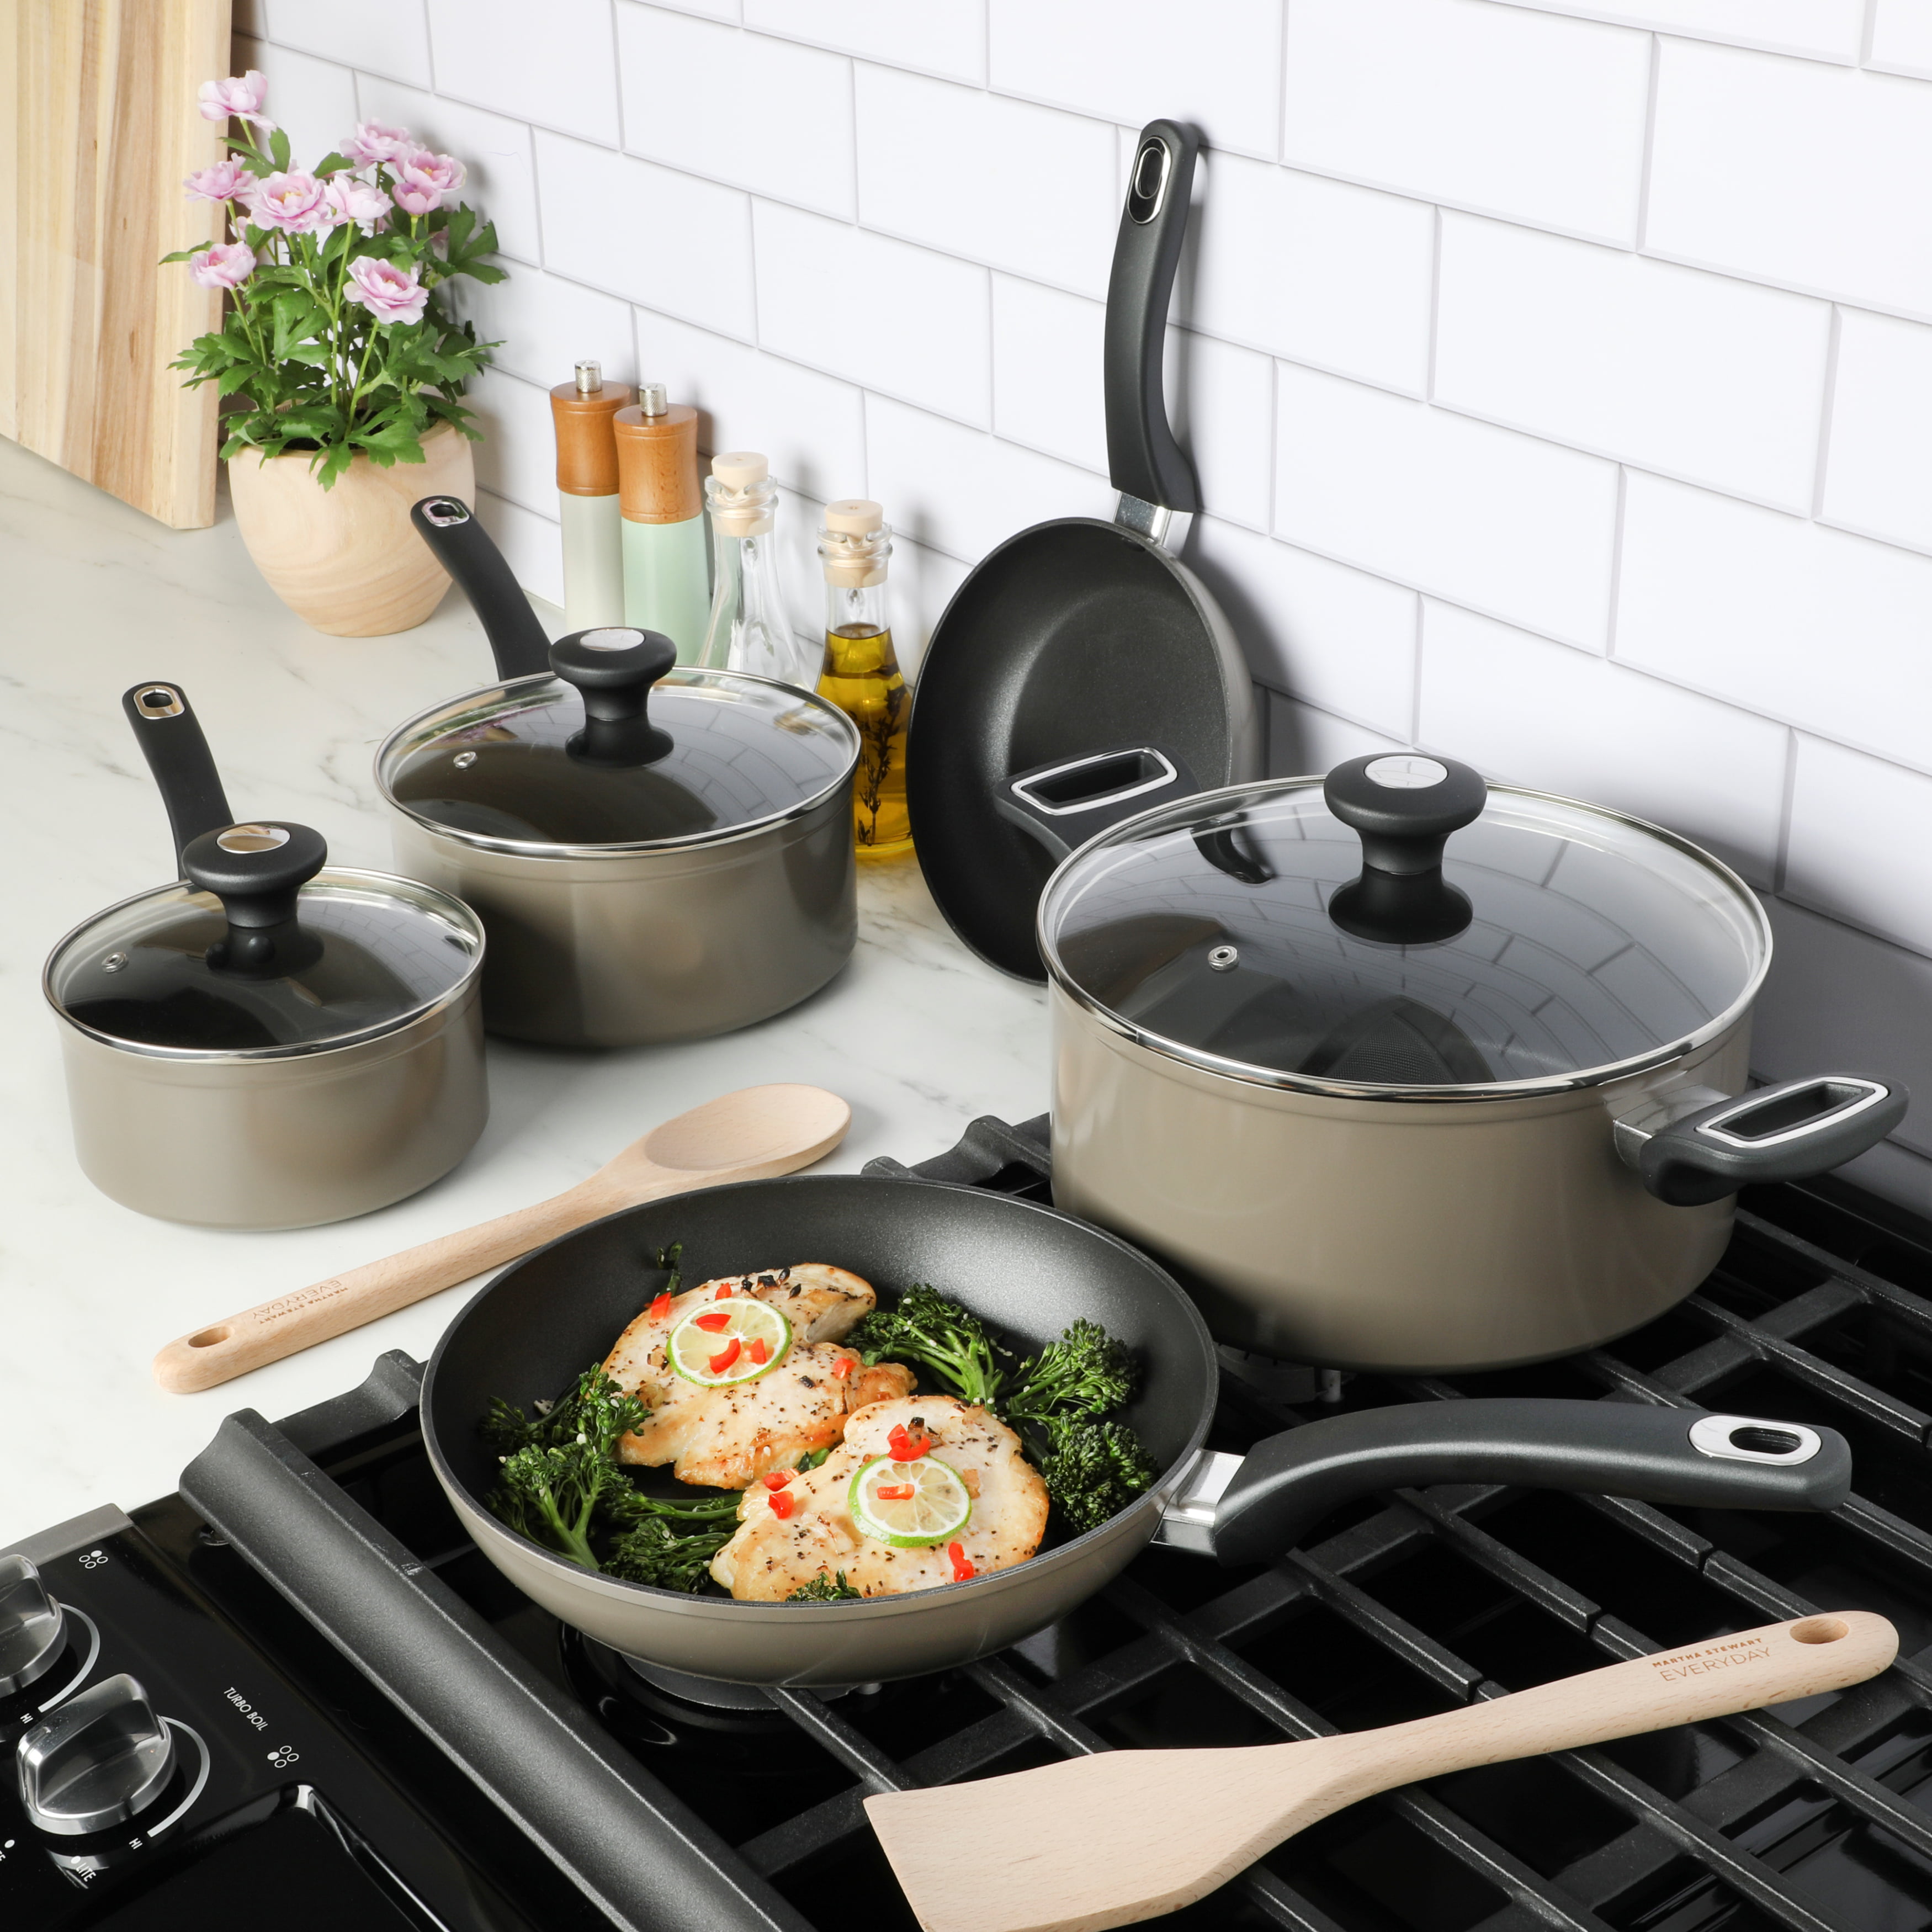 Martha Stewart Collection Bosworth Hard Anodized 10 Piece Cookware